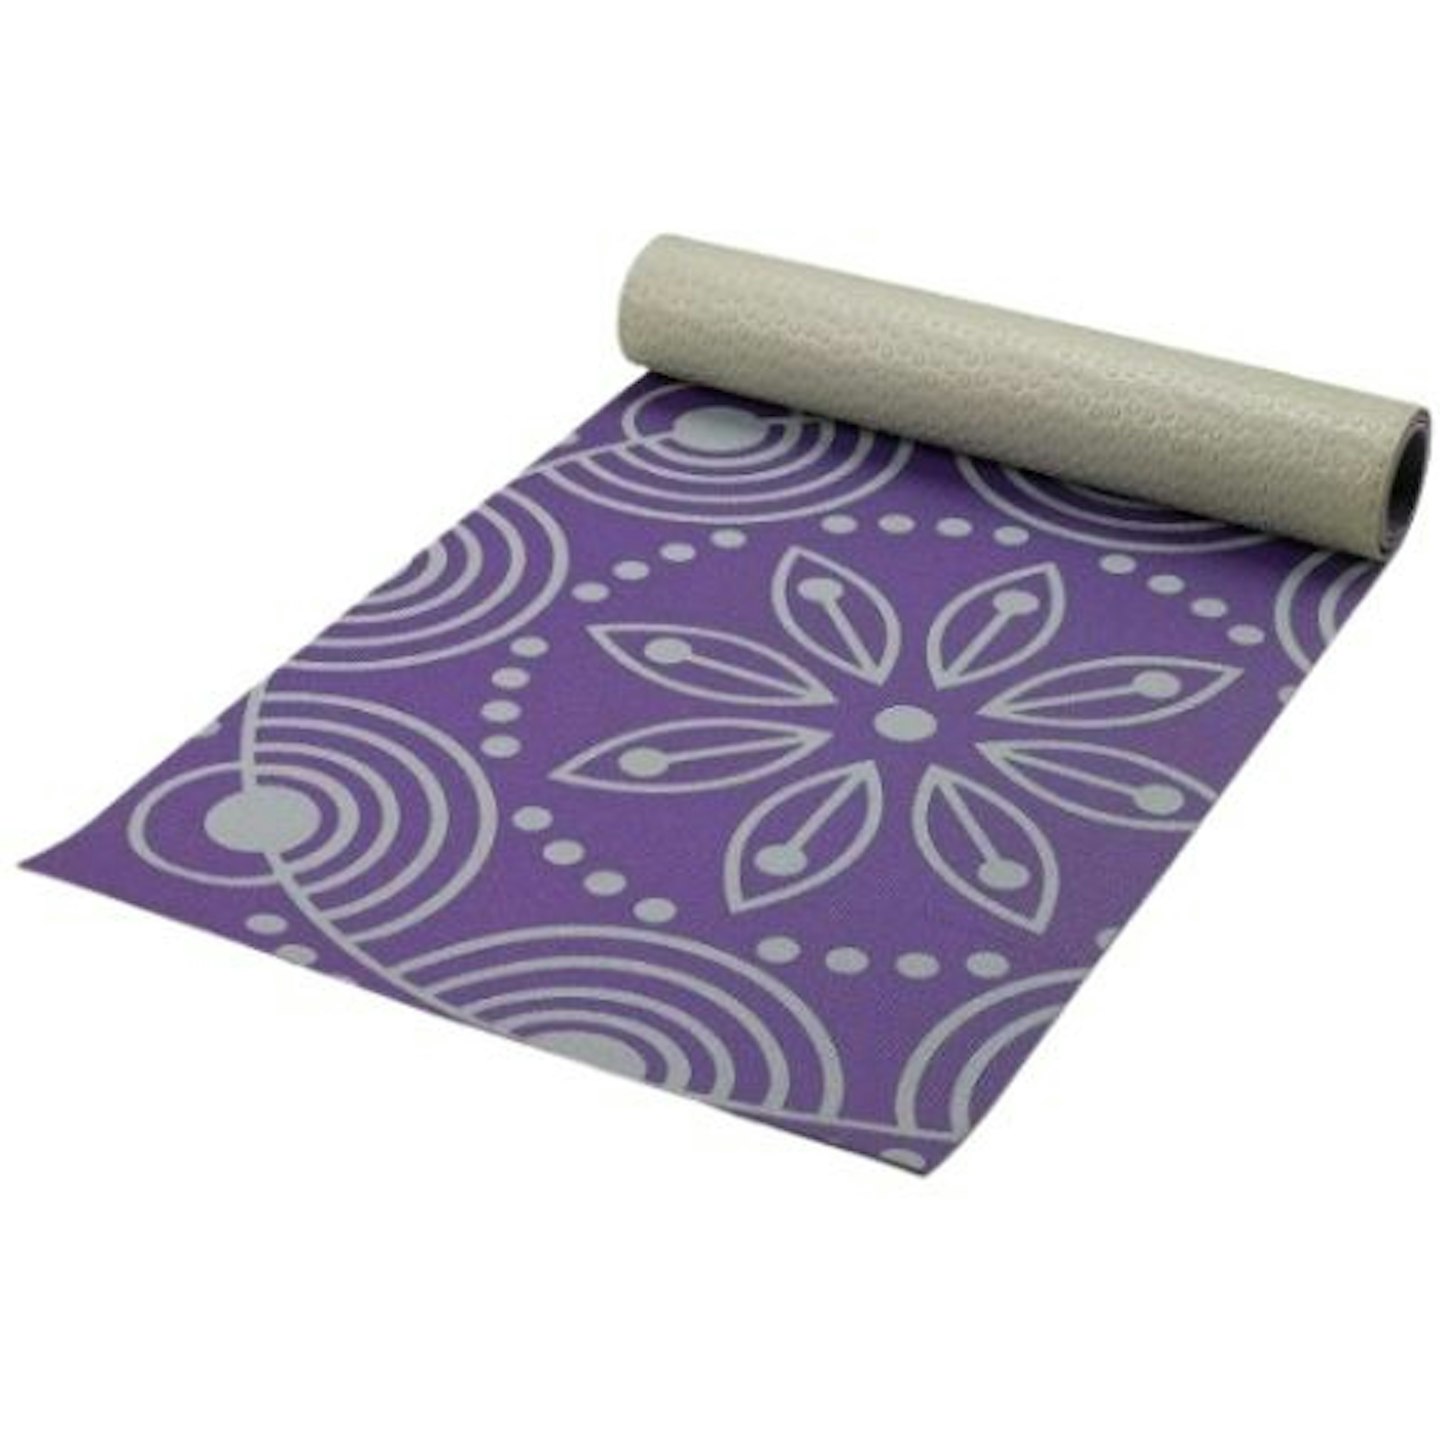 Opti Floral 6mm Thickness Printed Yoga Exercise Mat